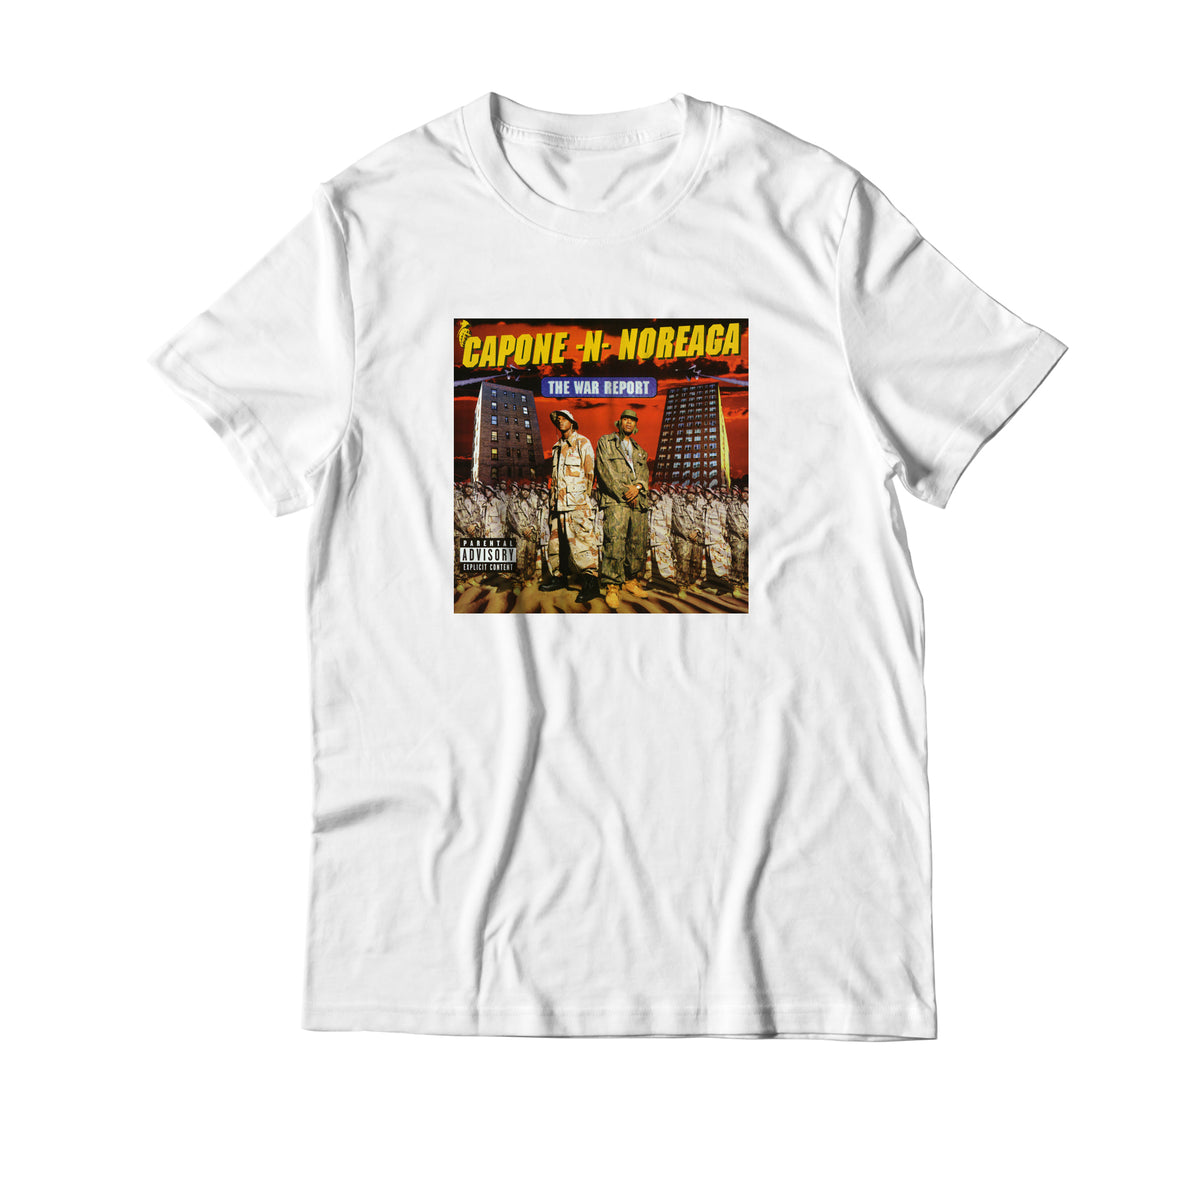 Capone and Noreaga The War Report Hip Hop T Shirt 